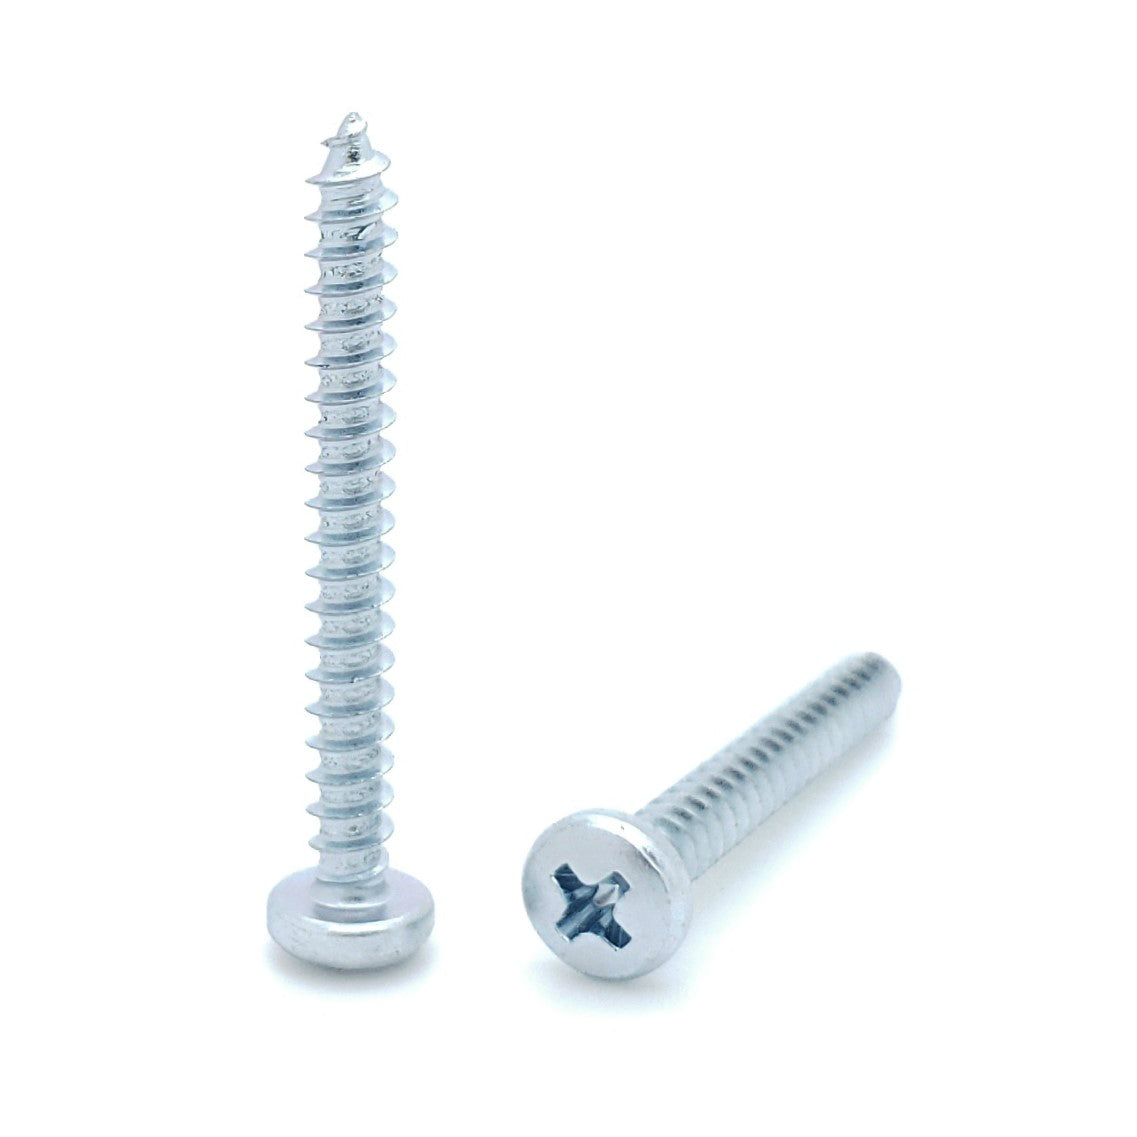 #8 x 1-1/2'' Type 17 Coarse Threaded Wood Screws, 10 Threads Per Inch, Flat  Head with Square Drive and Nibs, #2 Driver, Zinc Plated